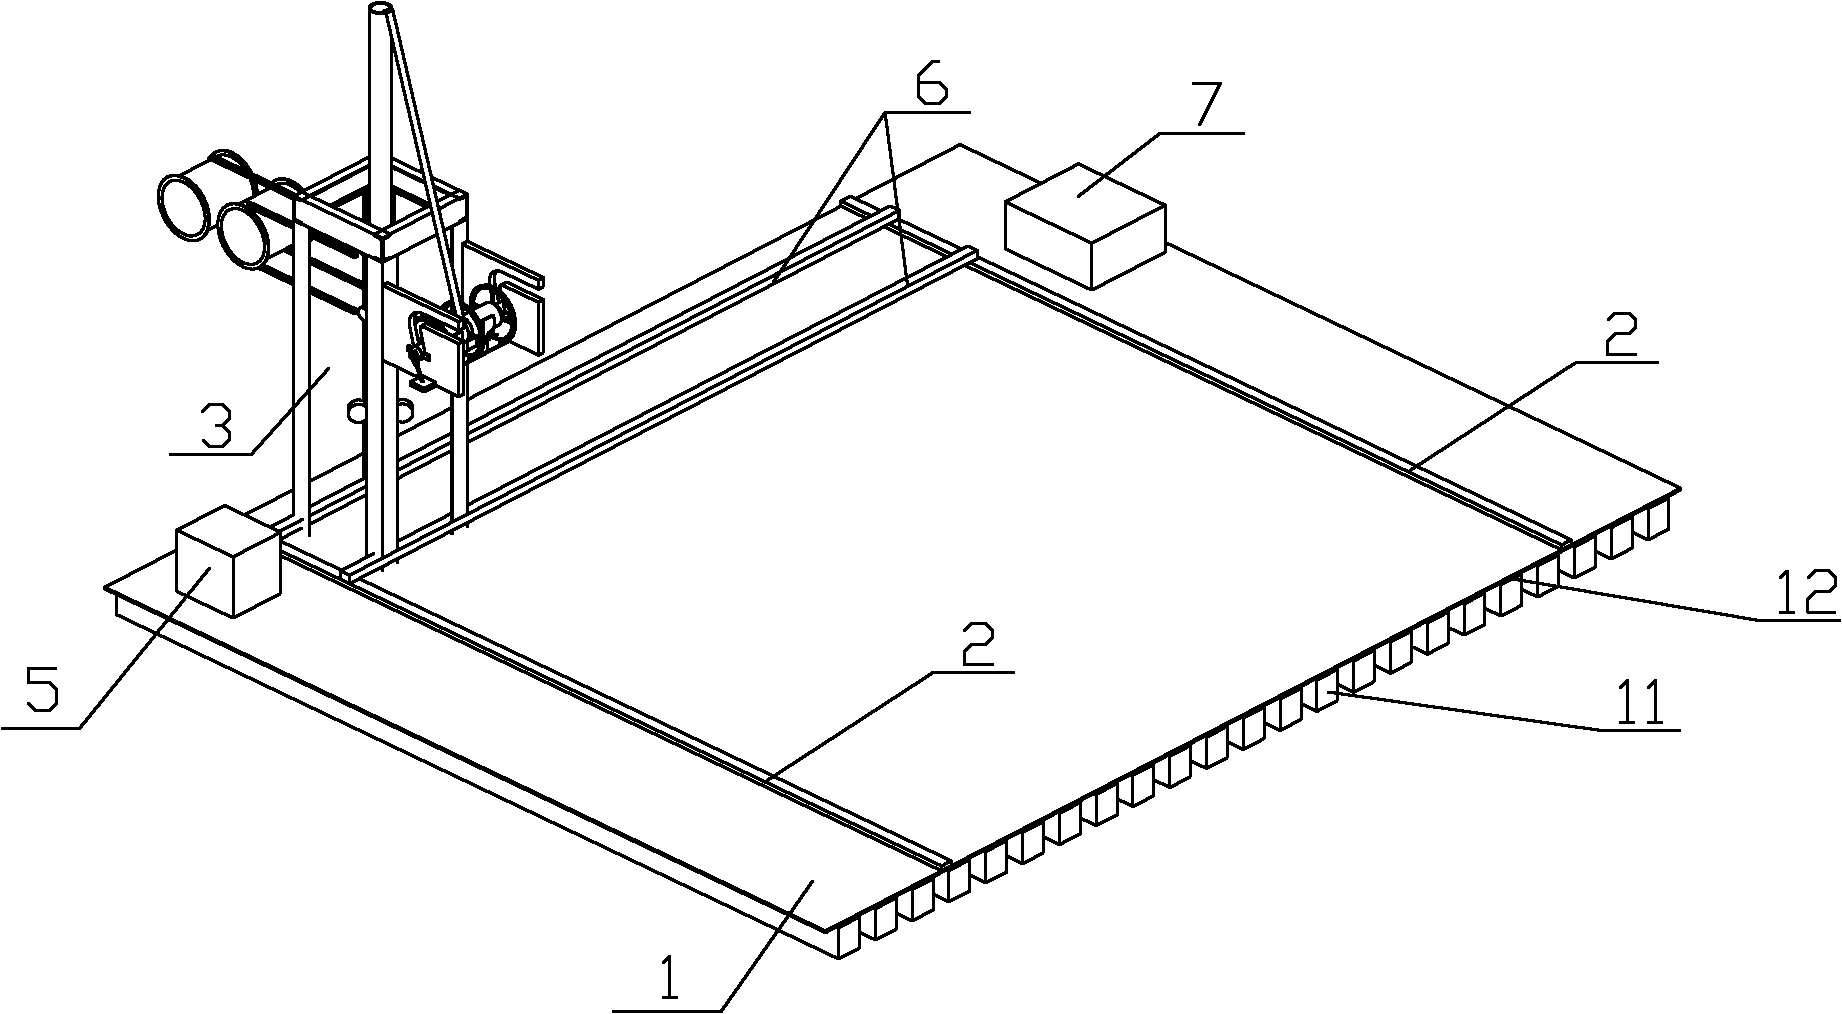 Mud-water amphibious plate-inserting device for soft foundation